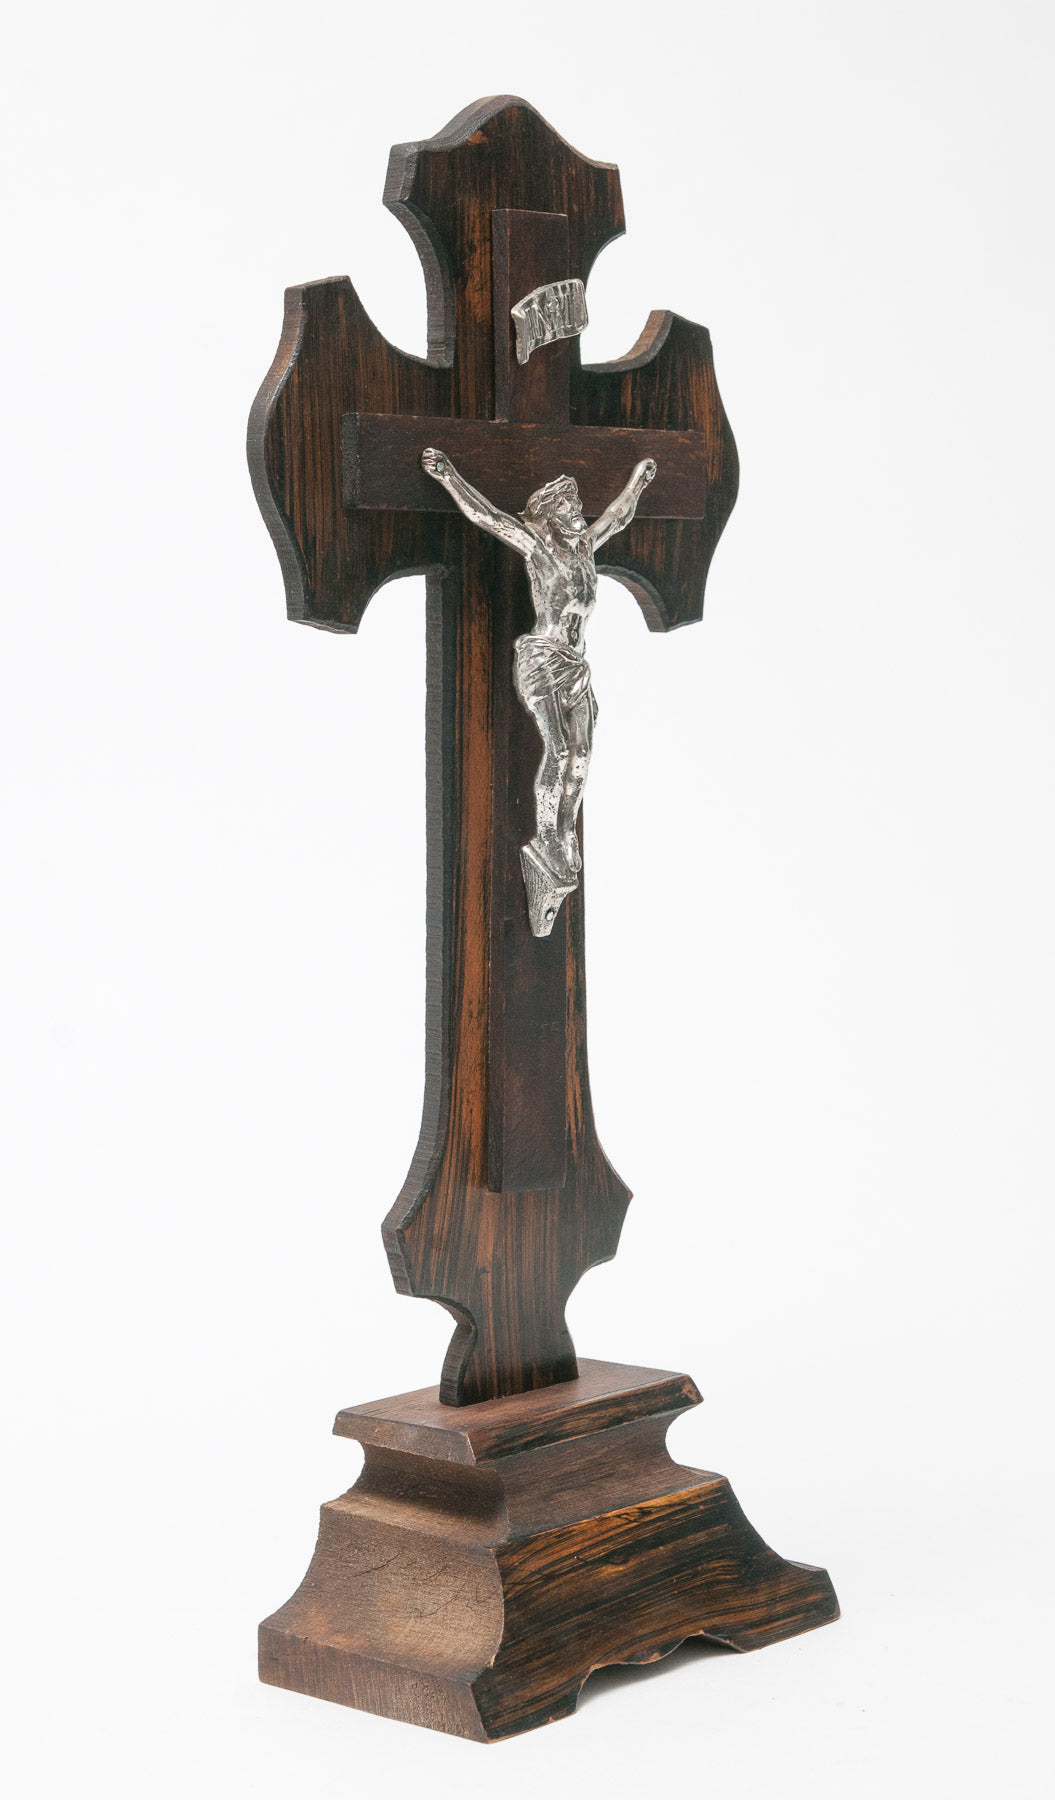 Antique Scumble Painted Wooden Altar Crucifix Cross with Cast Metal Christ (Code 0867)